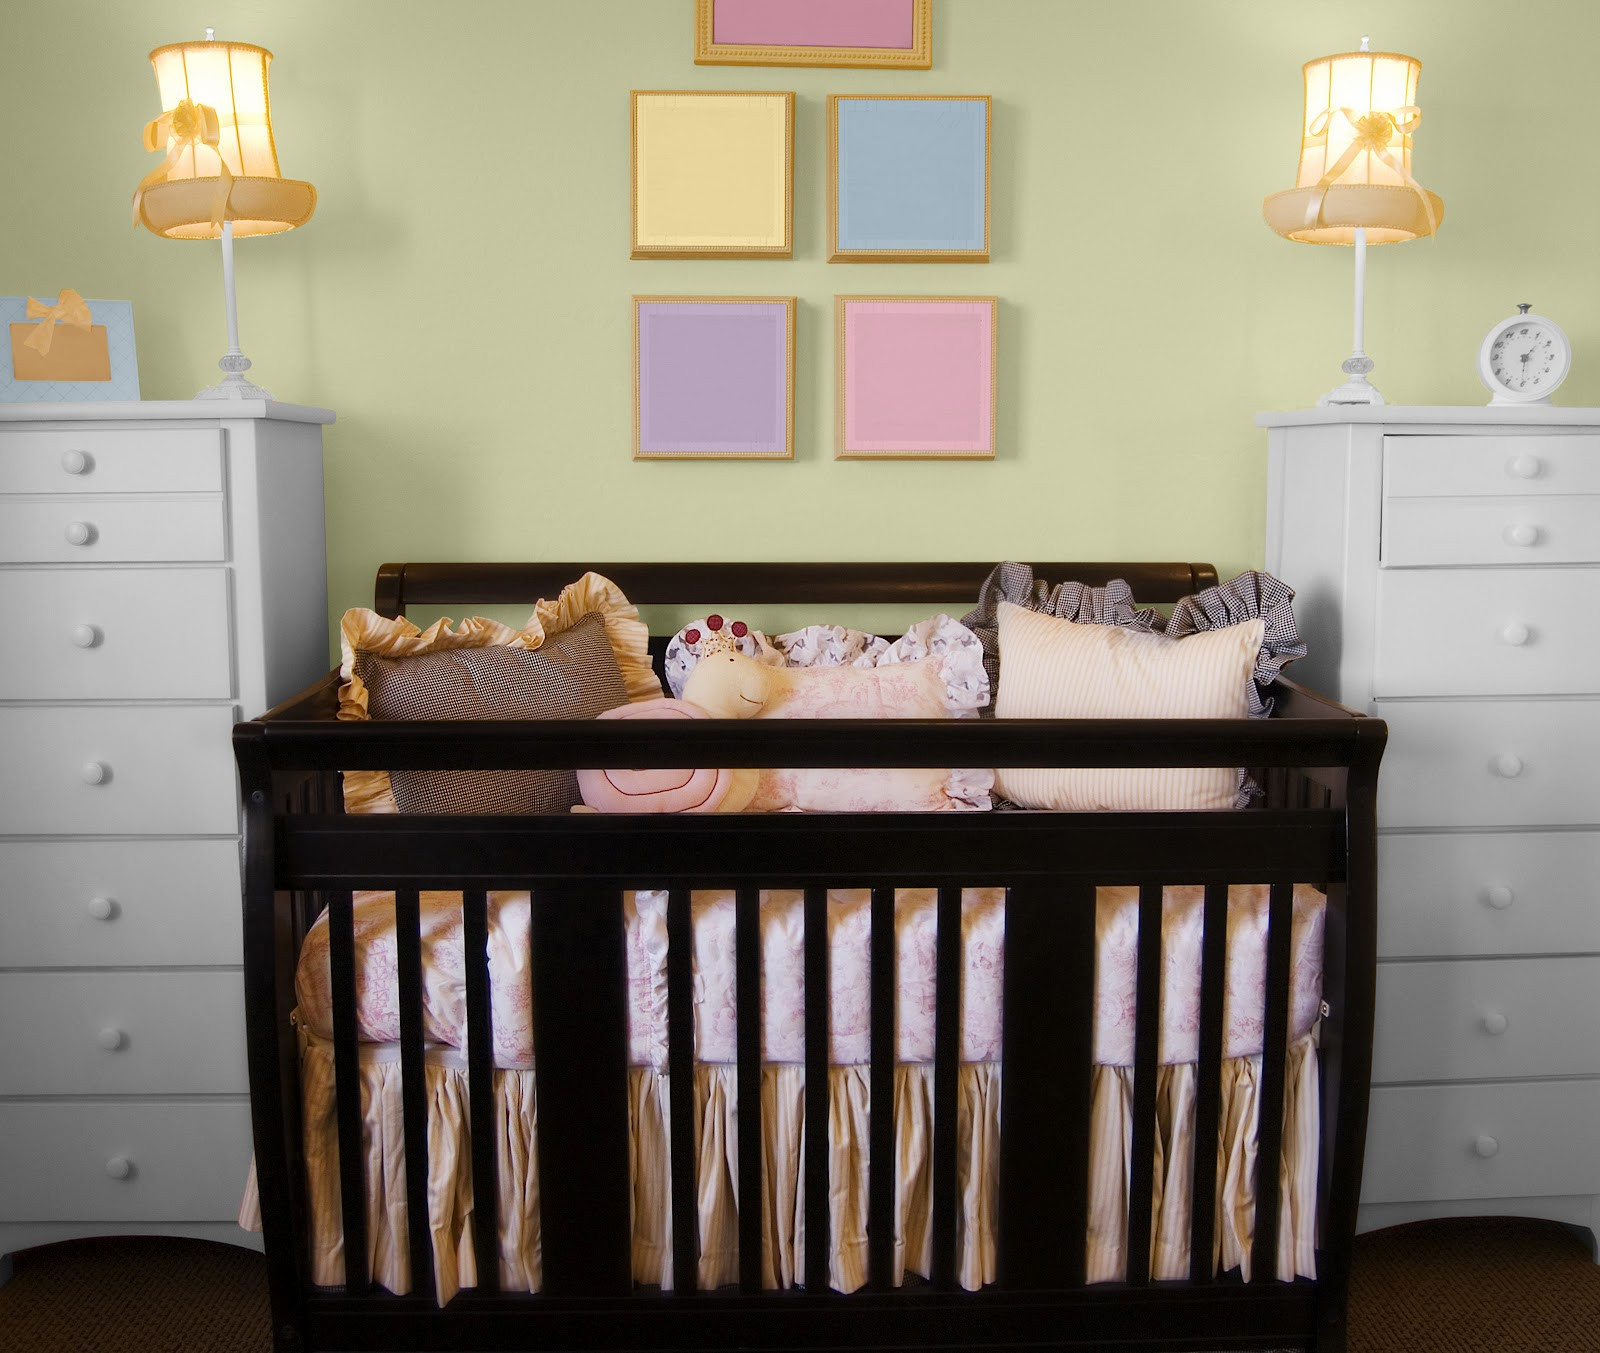 How To Decorate Baby Room
 Top 10 Baby Nursery Room Colors And Decorating Ideas